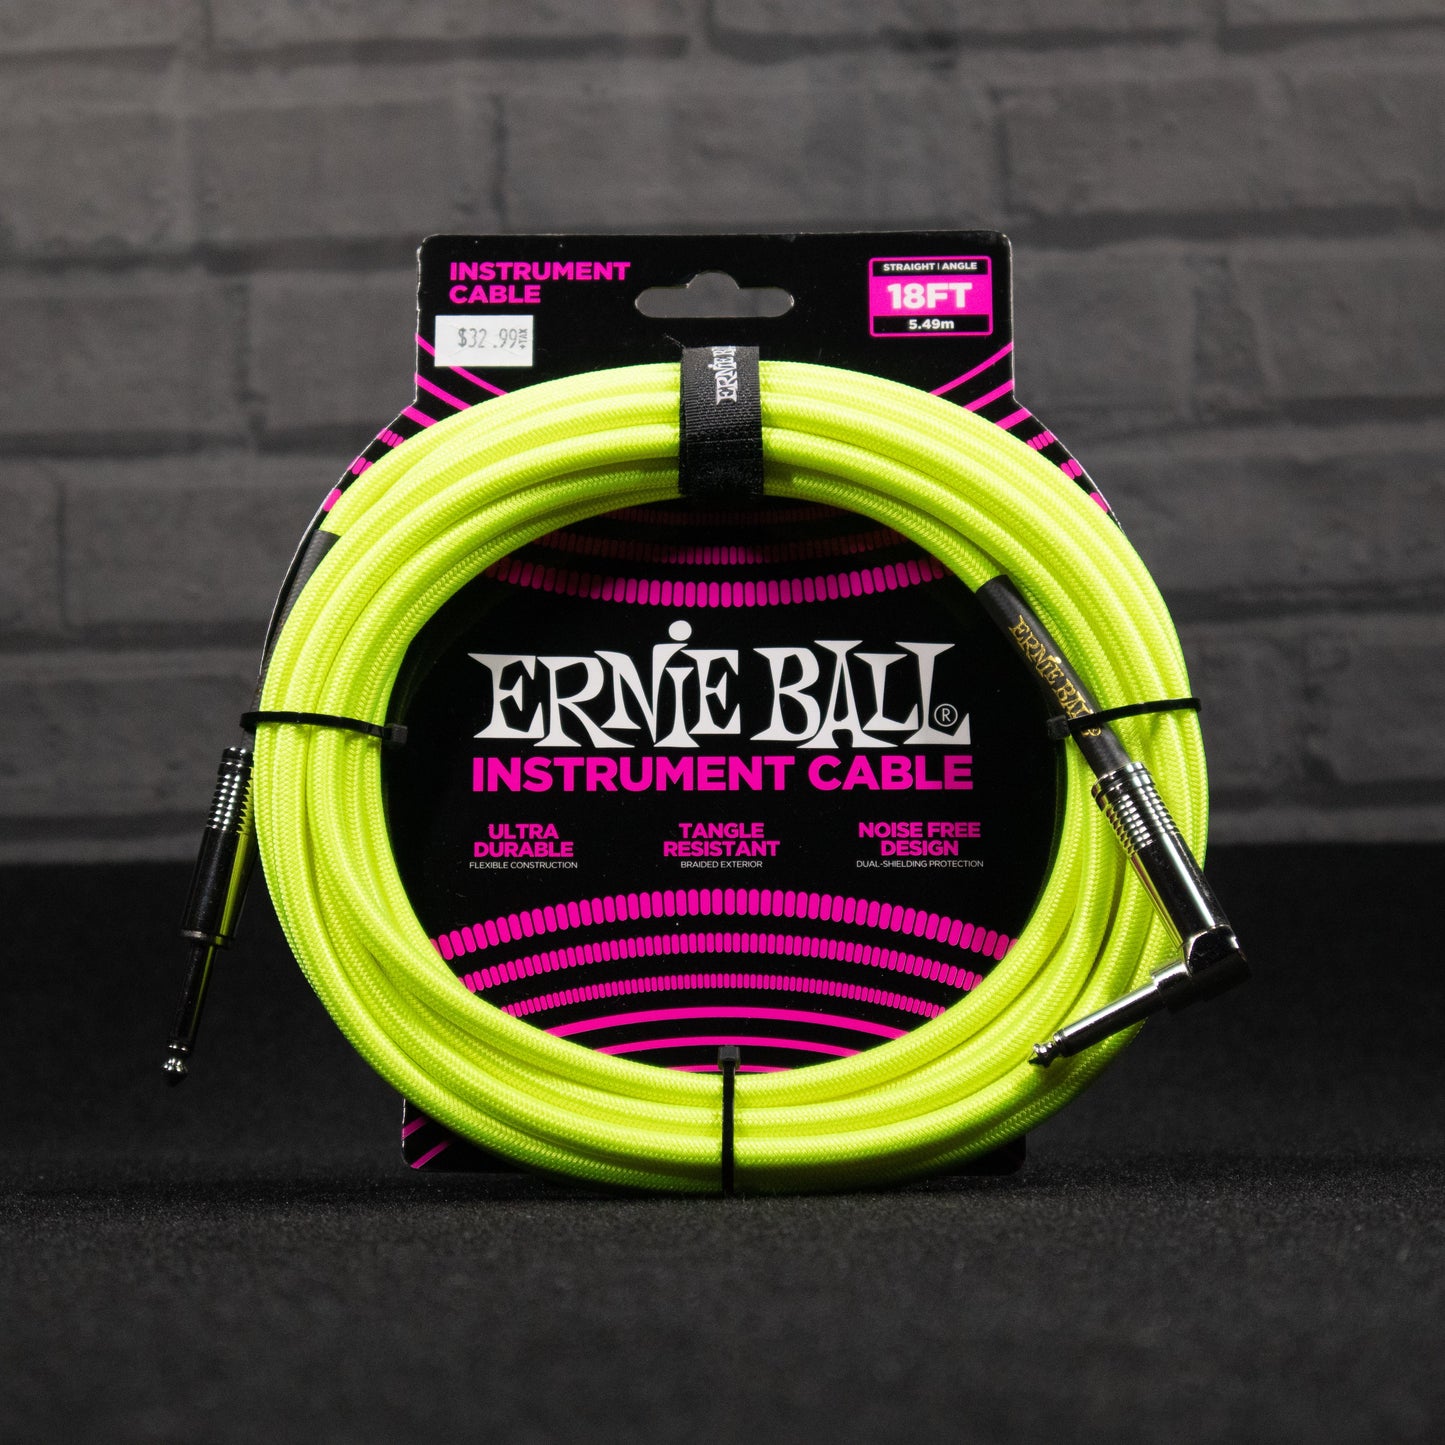 Ernie Ball Instrument Cable Braided Neon Yellow 18 Feet Straight To Angled P06085